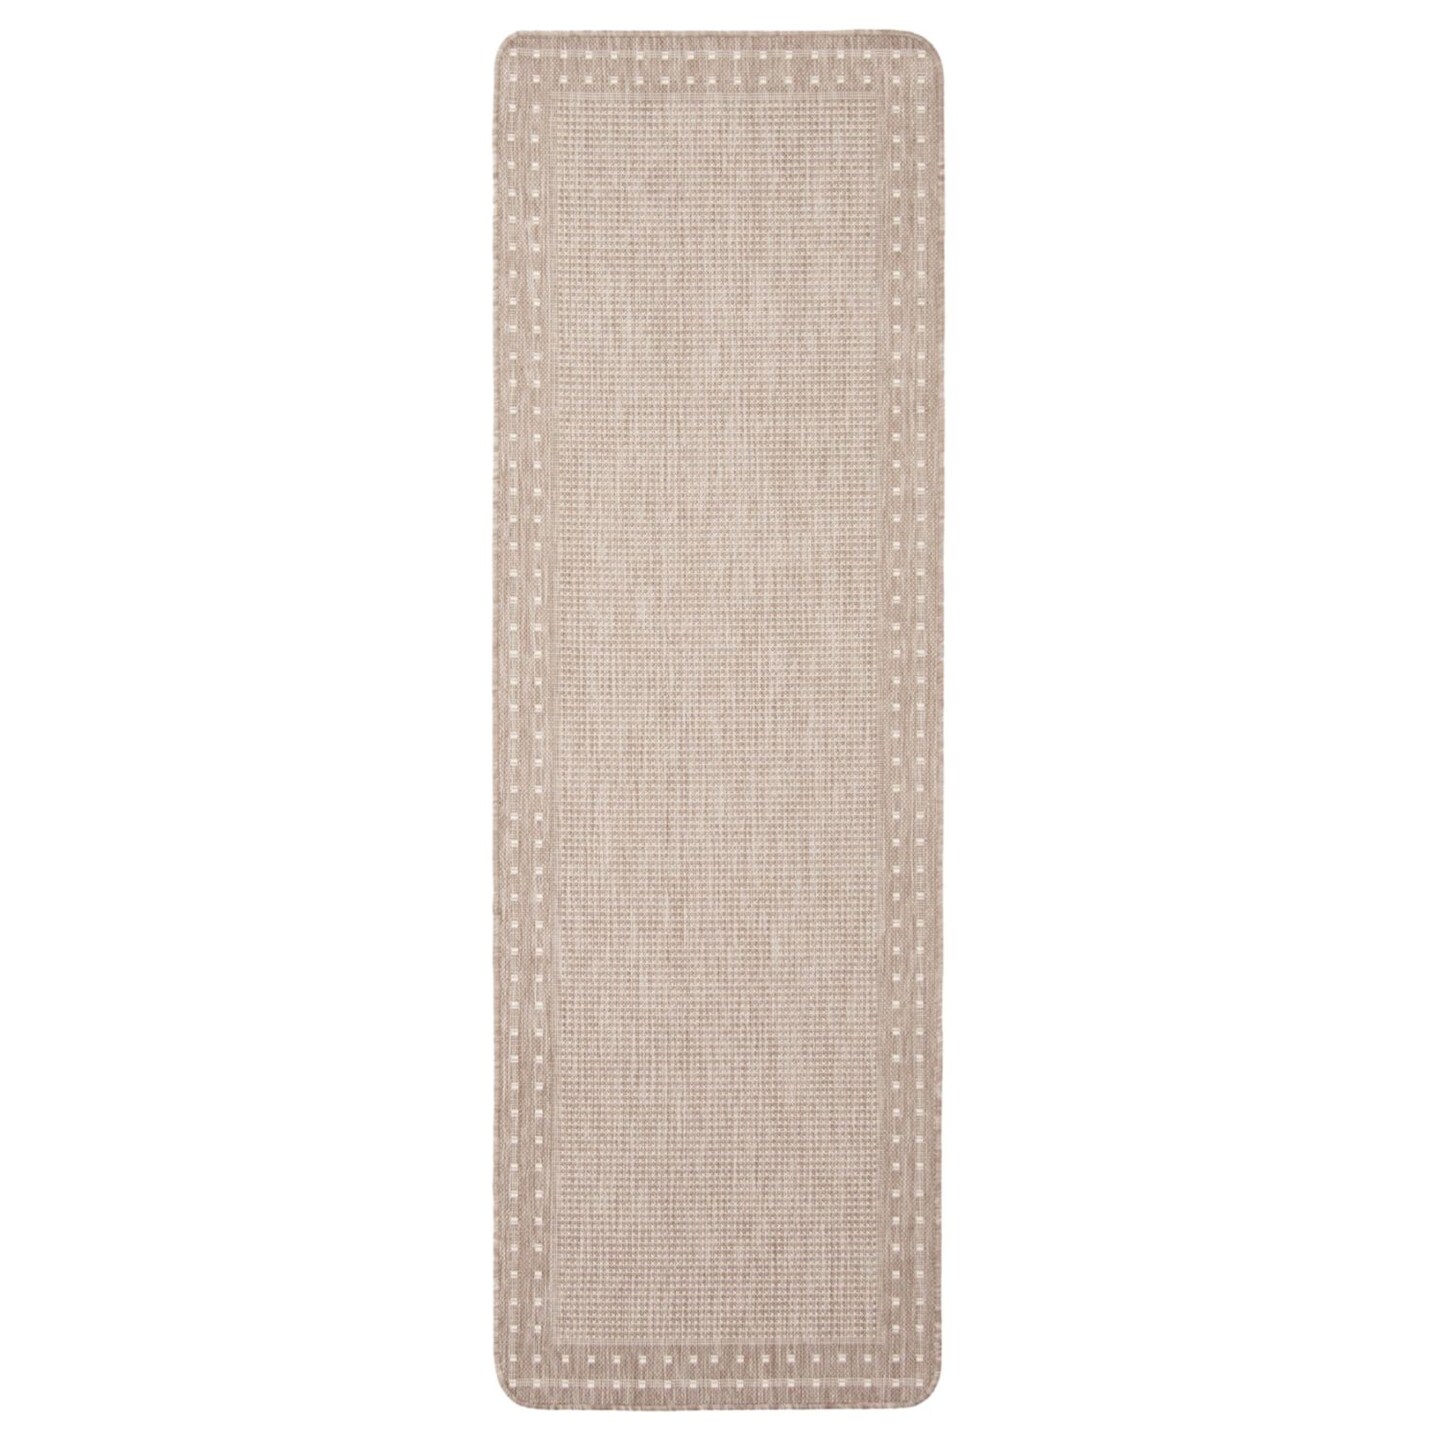 Chaudhary Living 2&#x27; x 6.5&#x27; Bordered Outdoor Area Throw Rug Runner - Taupe and Cream